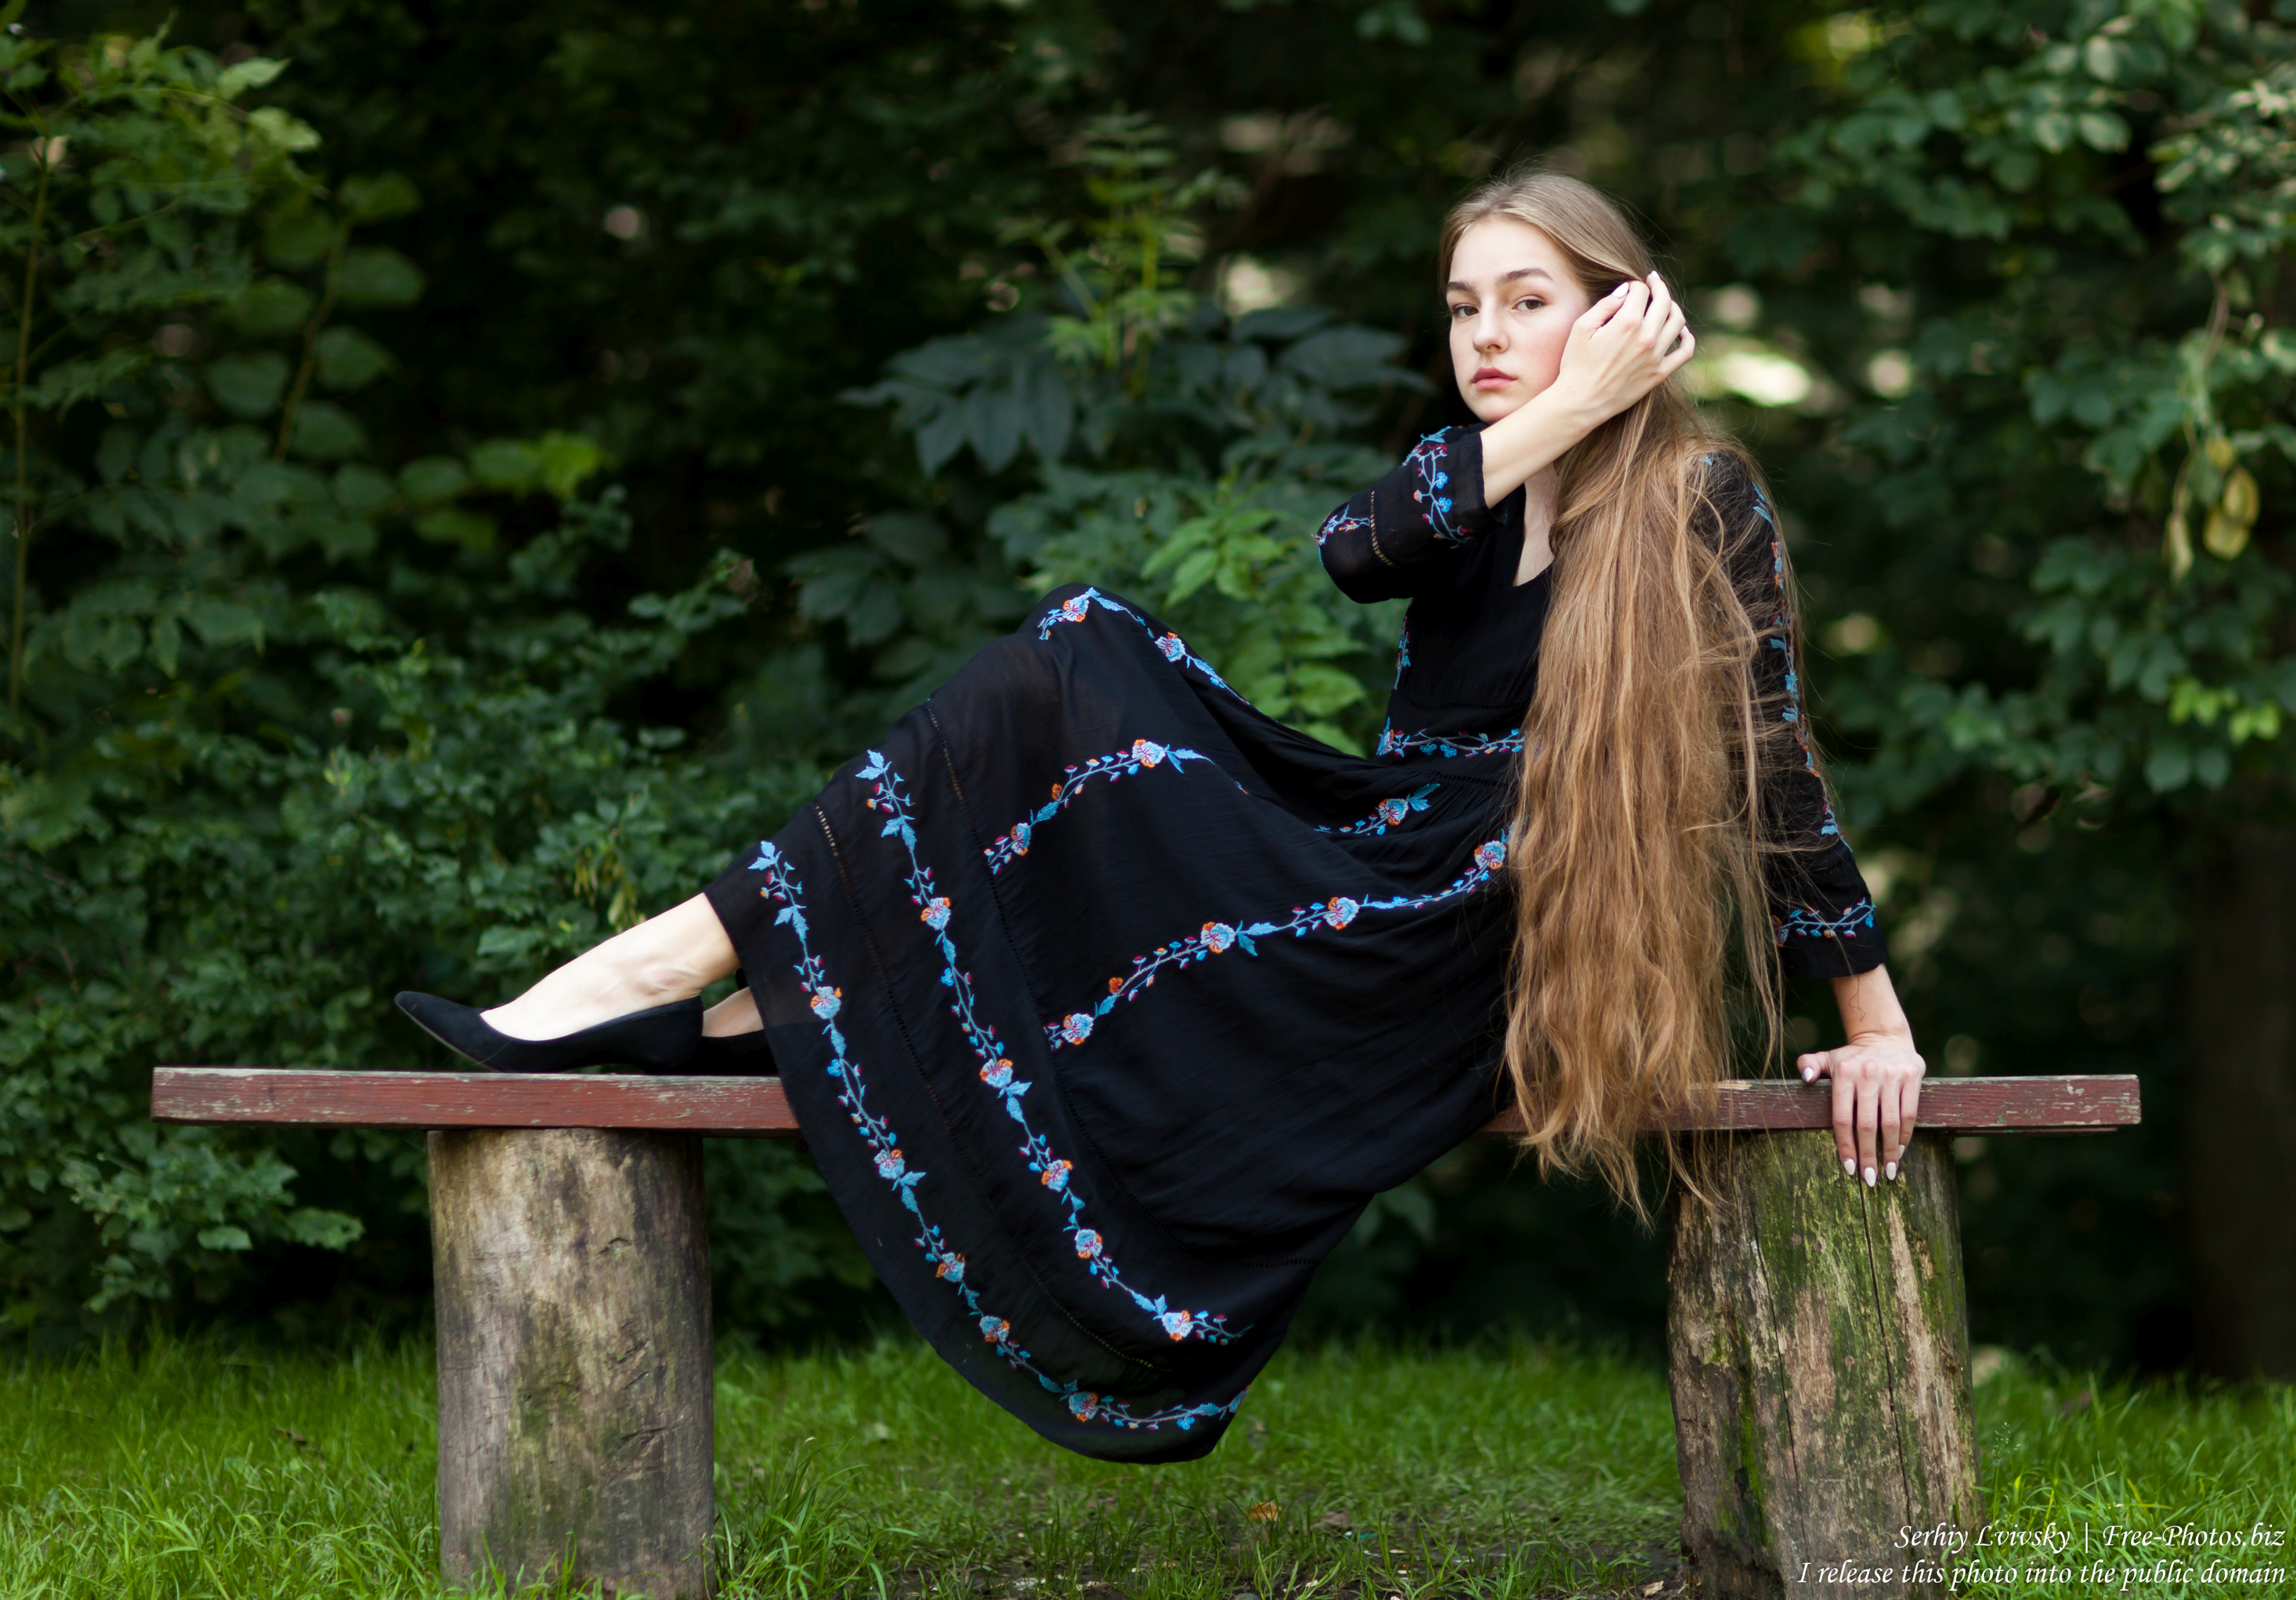 justyna_a_16-year-old_fair-haired_girl_photographed_in_june_2018_by_serhiy_lvivsky_19